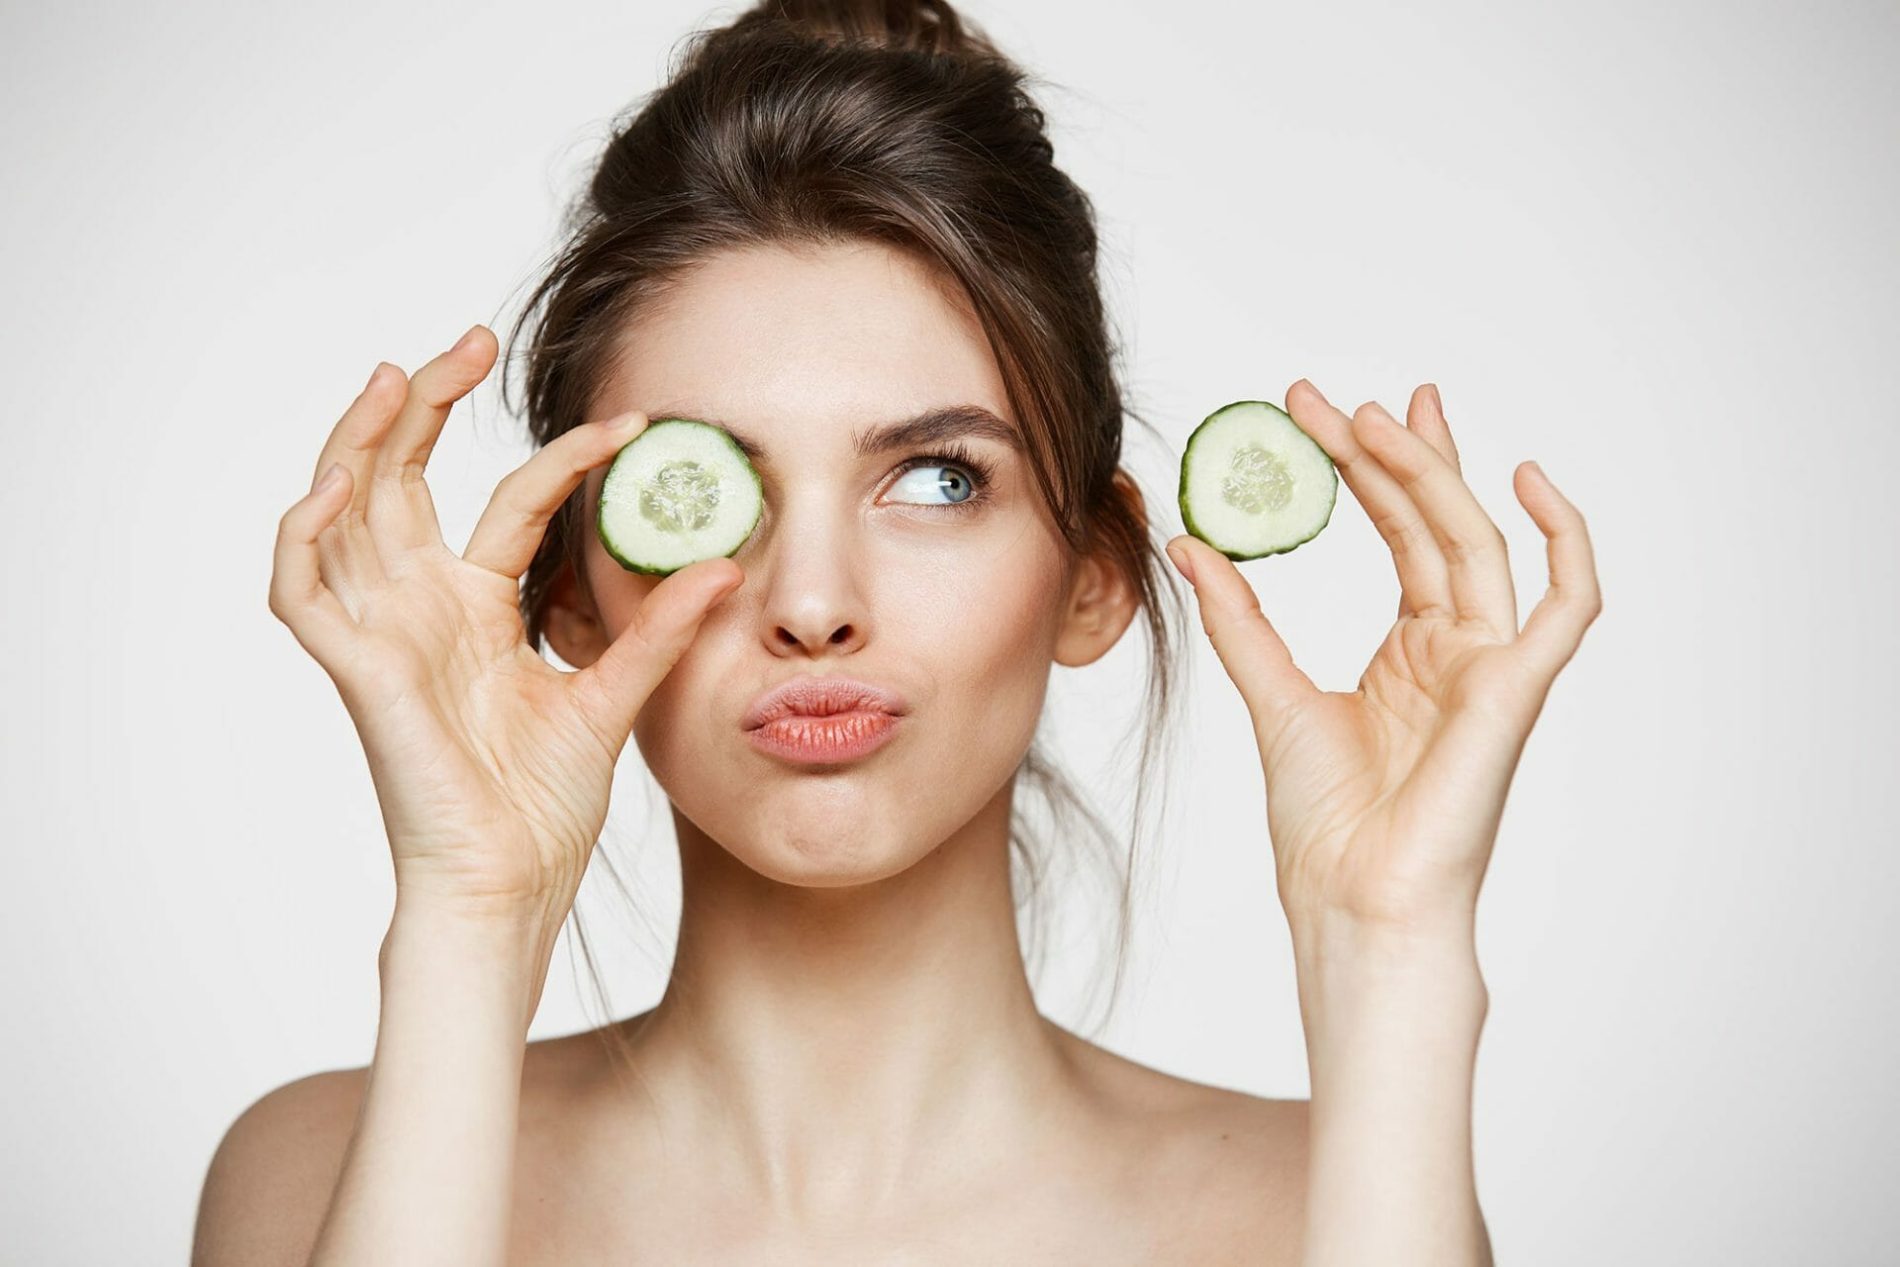 Anti-ageing skincare tips for women in their 20s